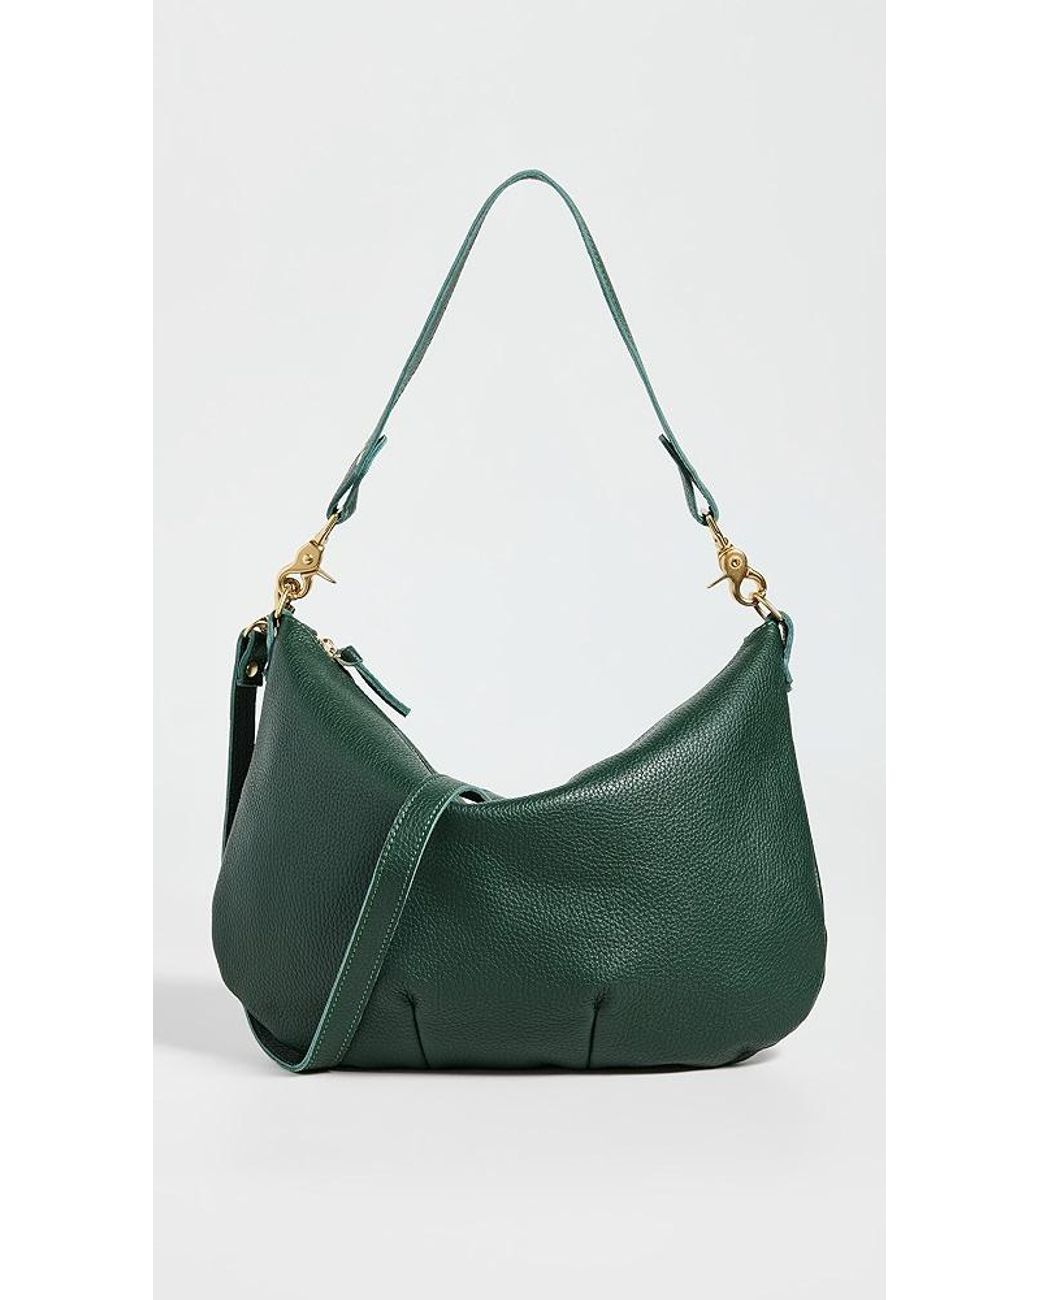 Clare V - Authenticated Handbag - Leather Green for Women, Never Worn